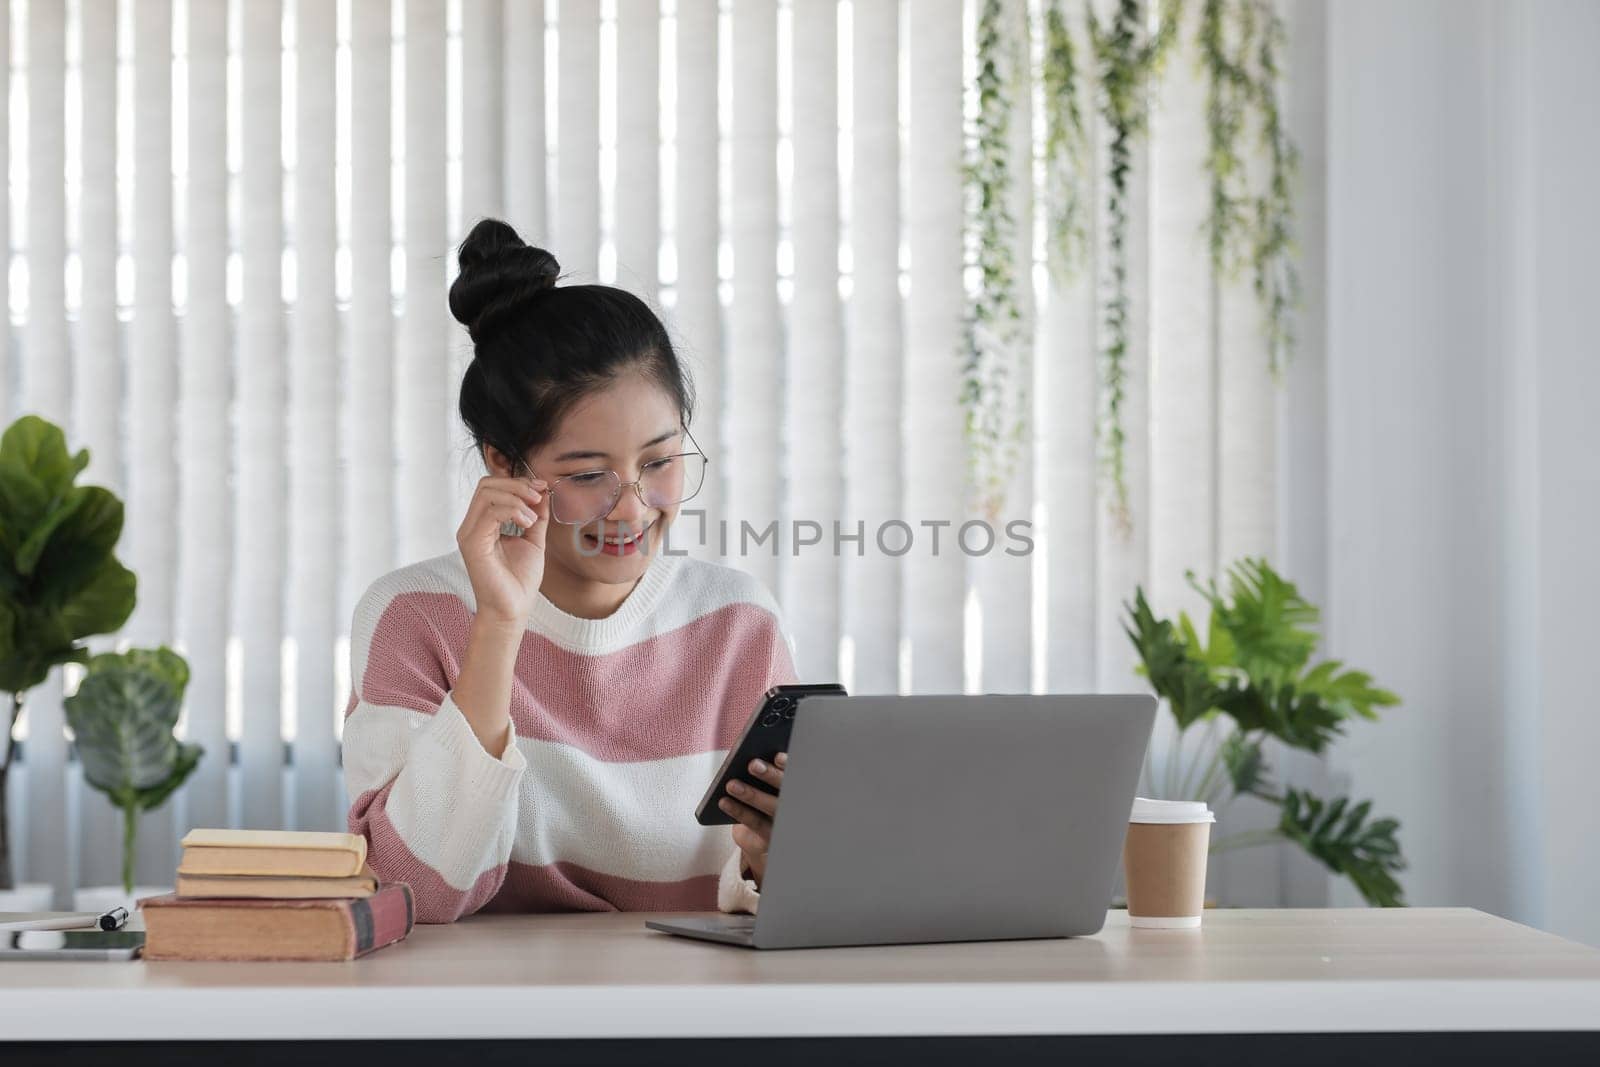 A young woman studies online using a laptop and smartphone in a modern home office, surrounded by plants and books.